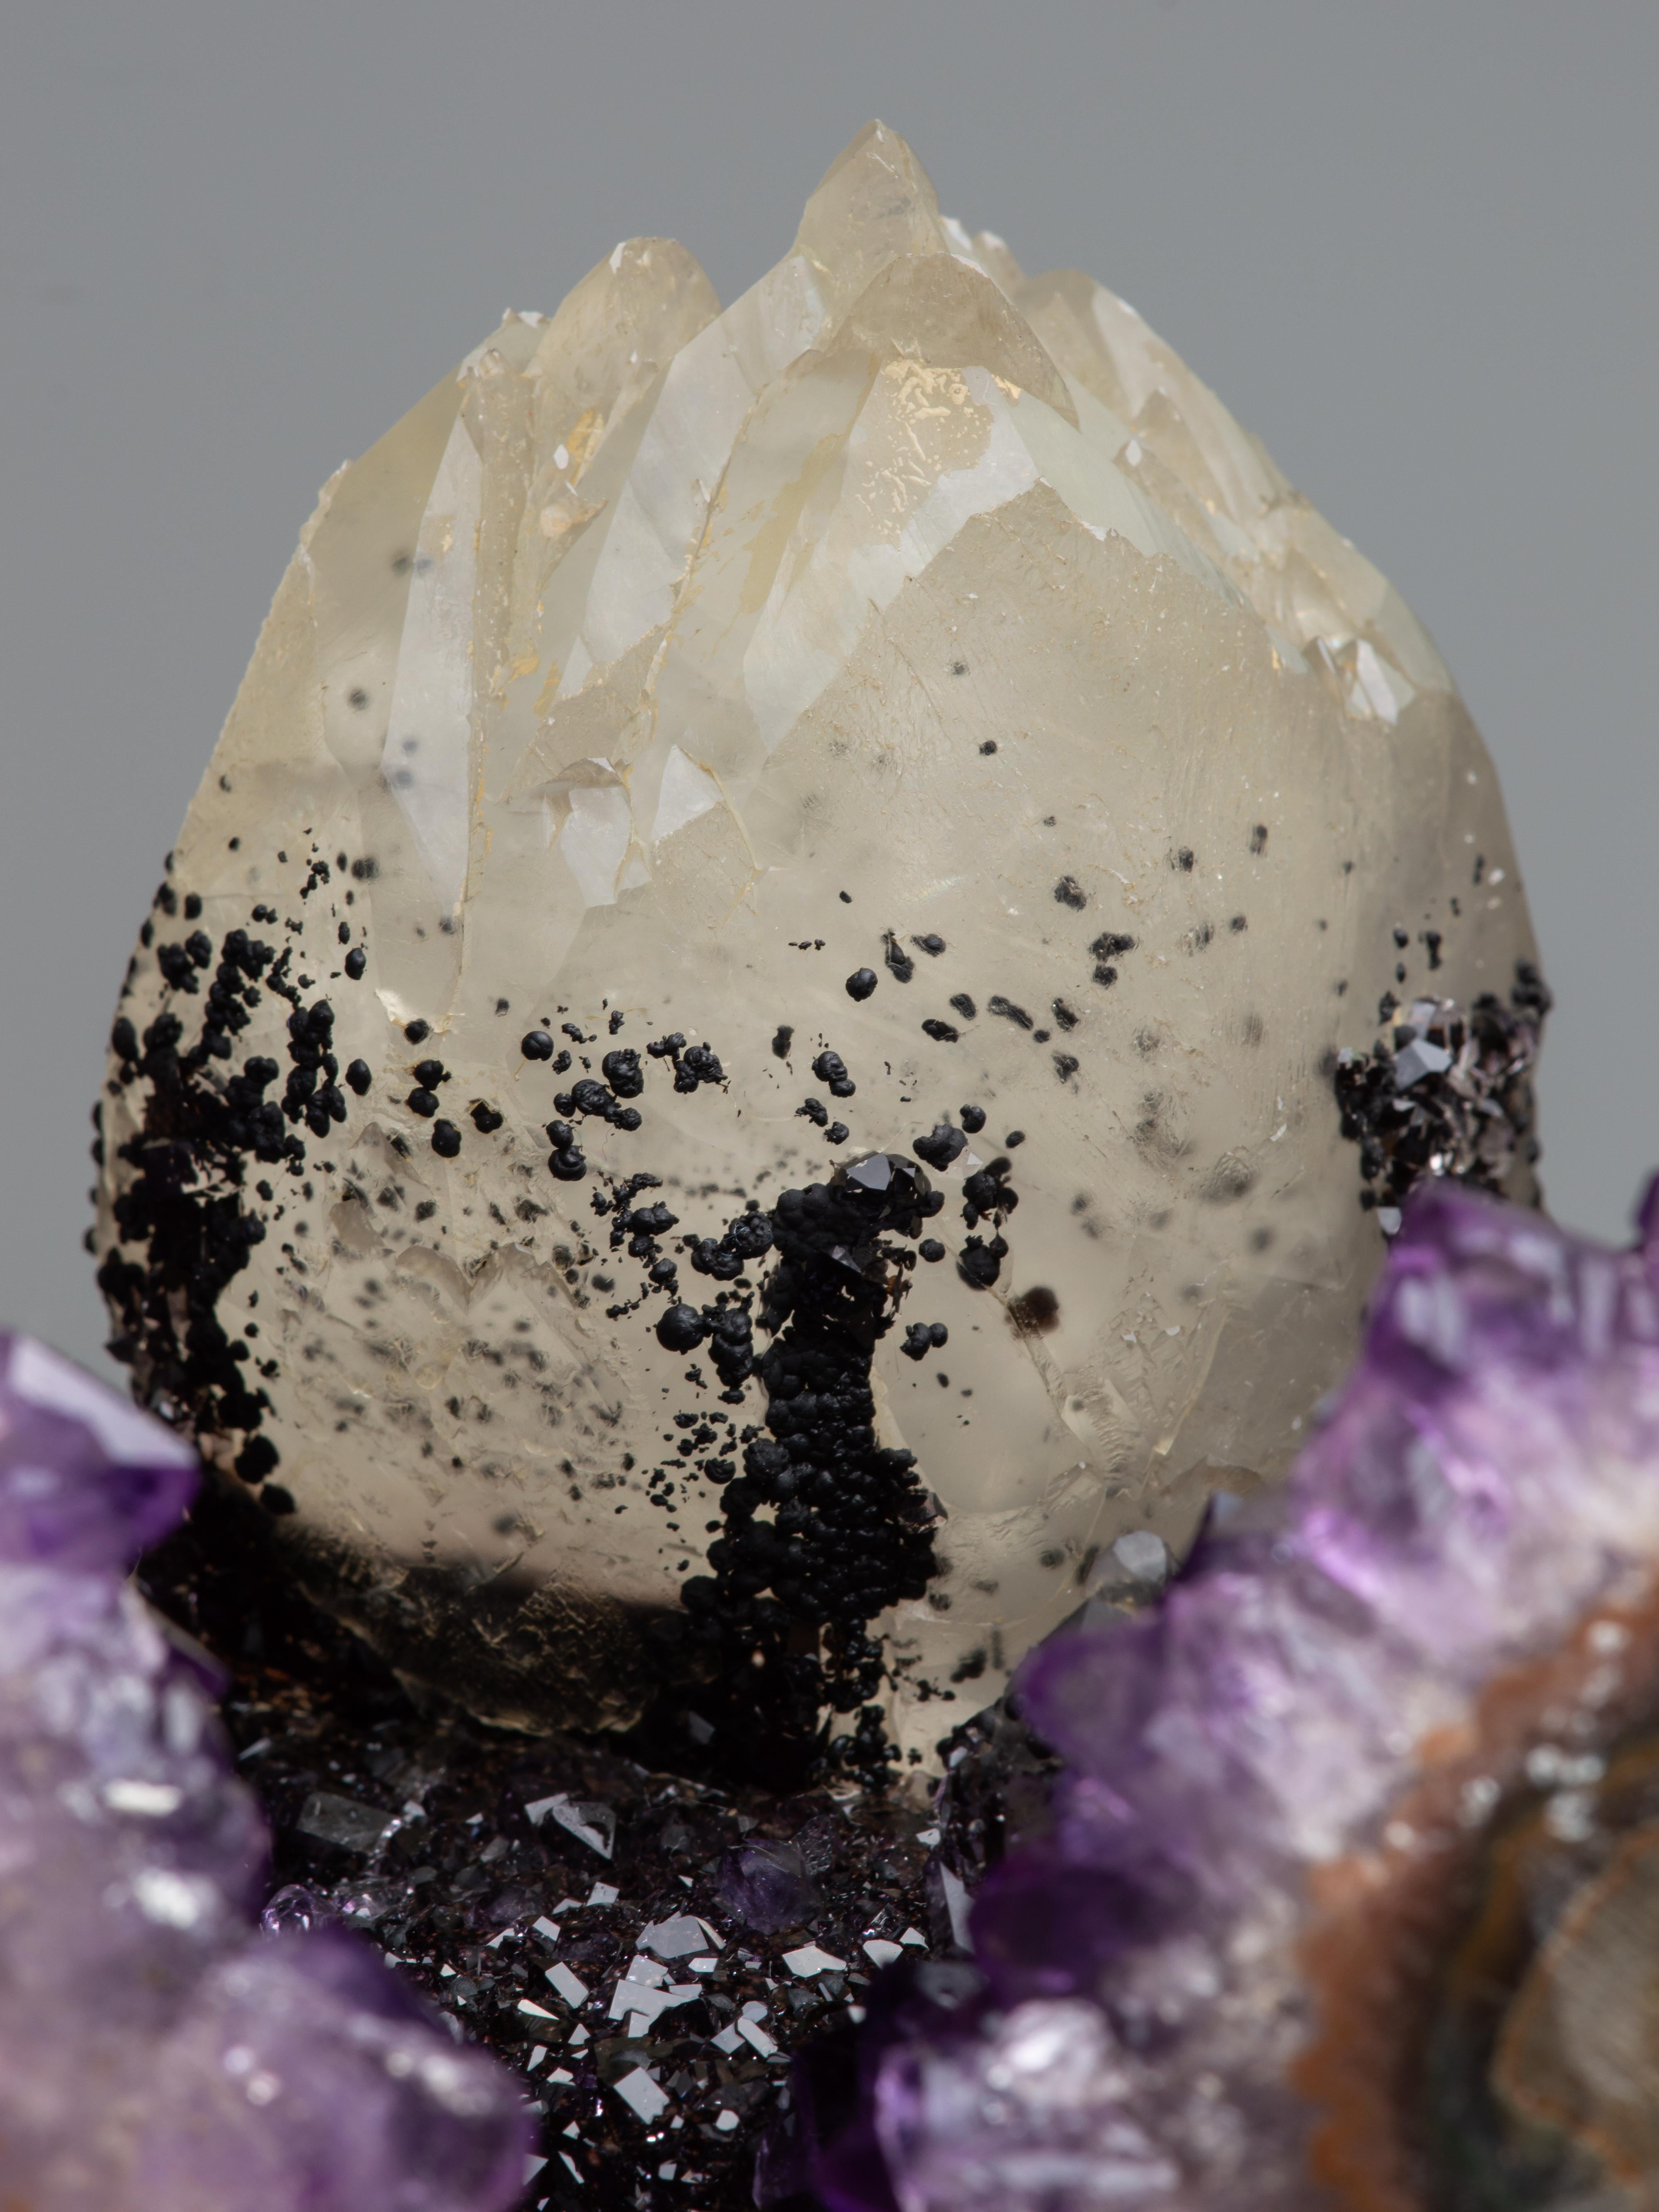 Angel Shaped Amethyst Crystals and Calcite mineral formation 1